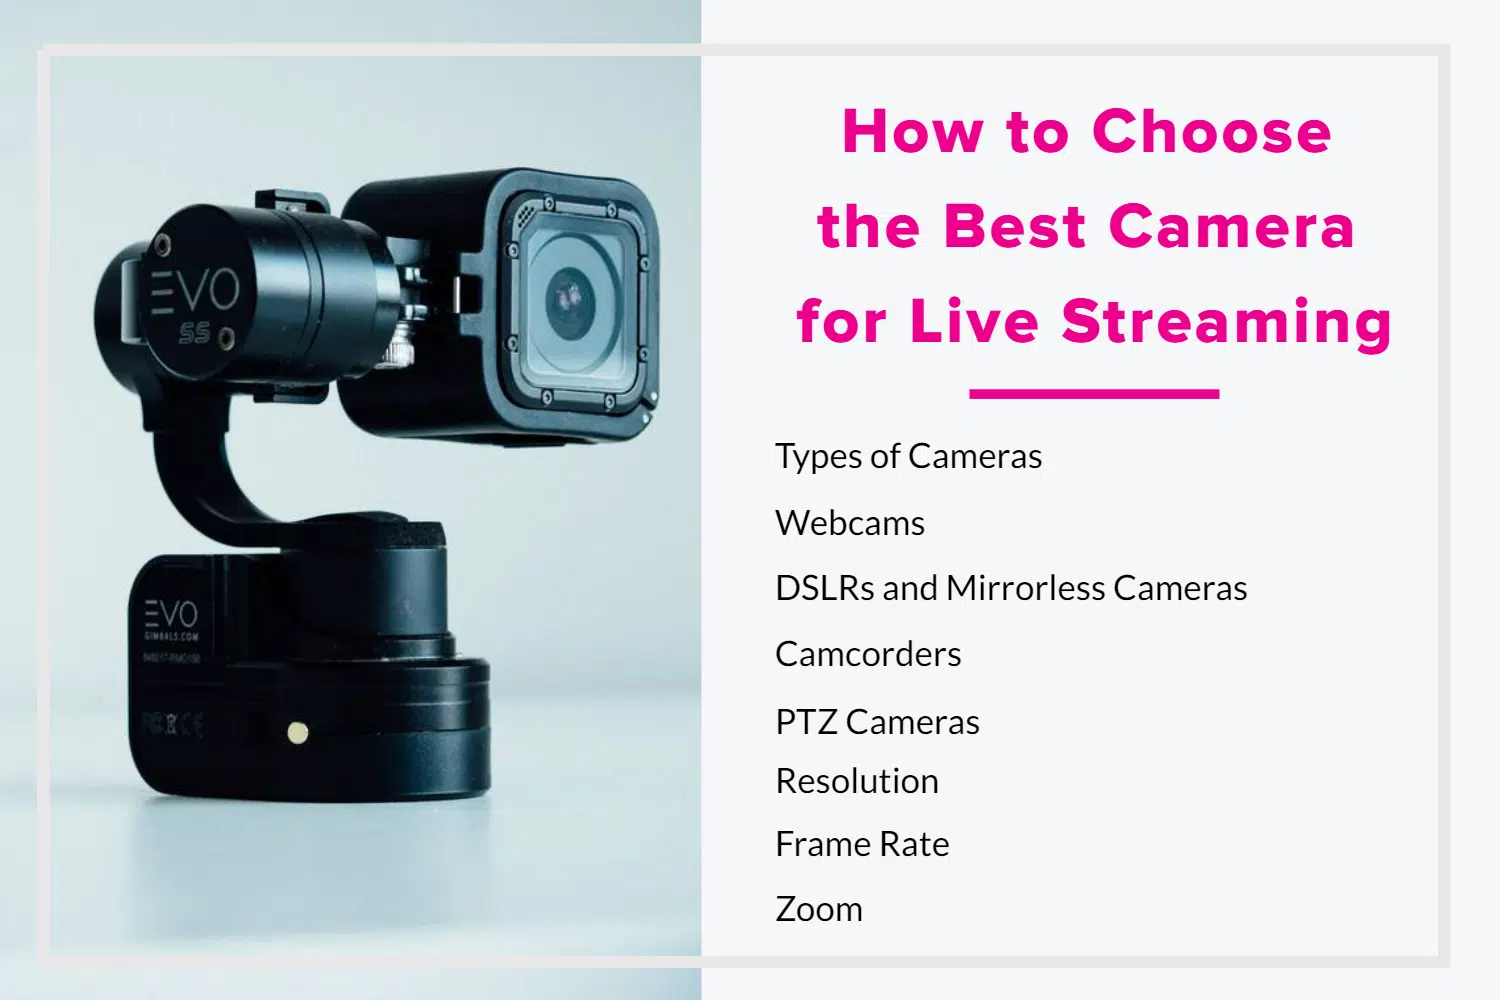 https://justcreative.com/wp-content/uploads/2022/04/How-to-Choose-the-Best-Camera-for-Live-Streaming.png.webp